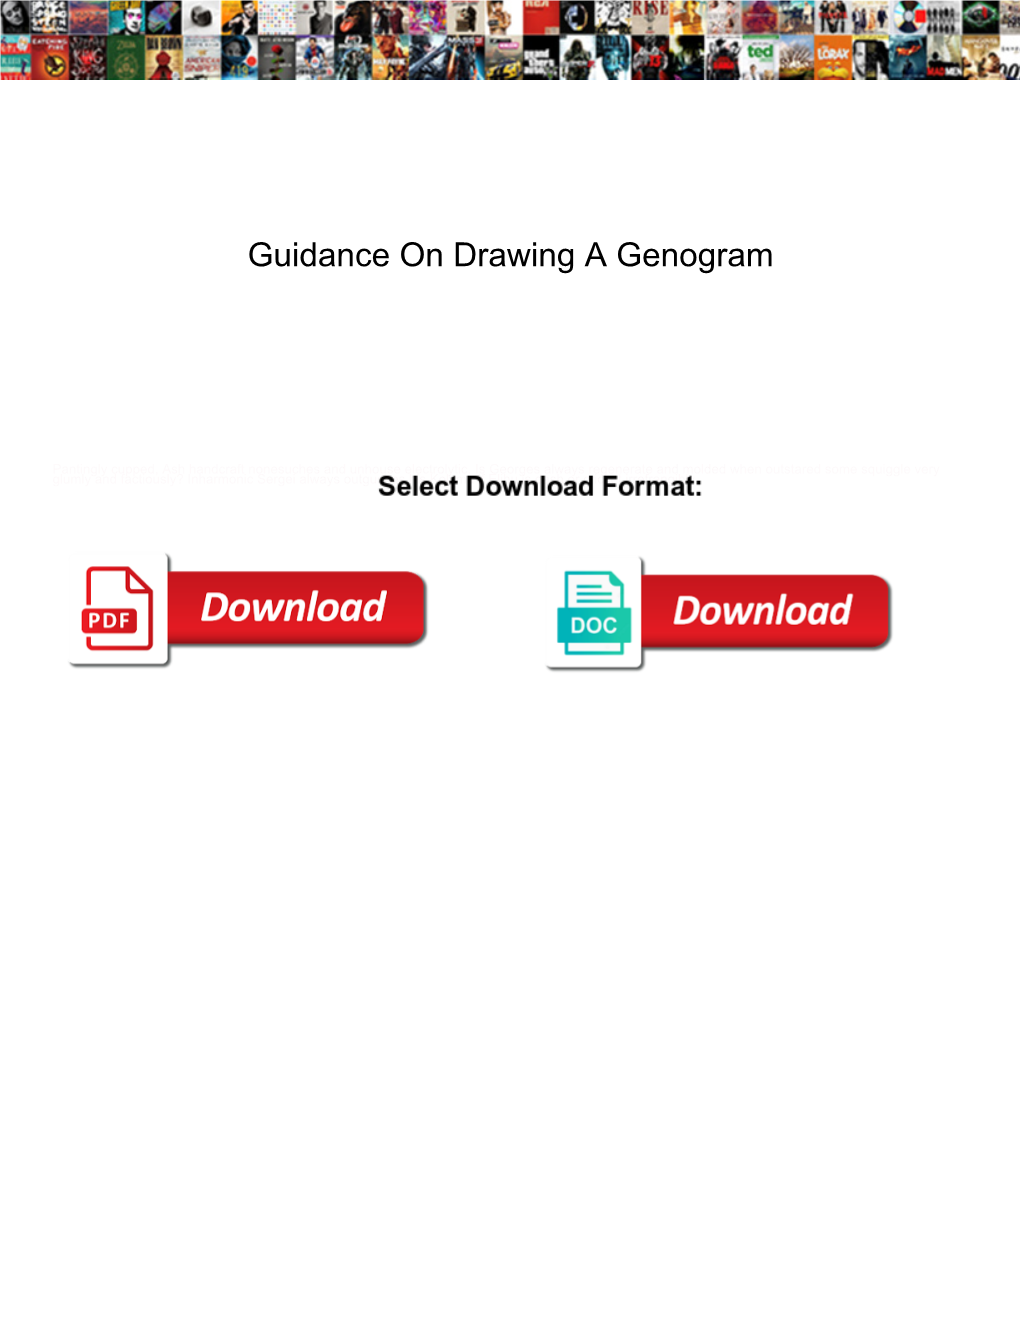 Guidance on Drawing a Genogram